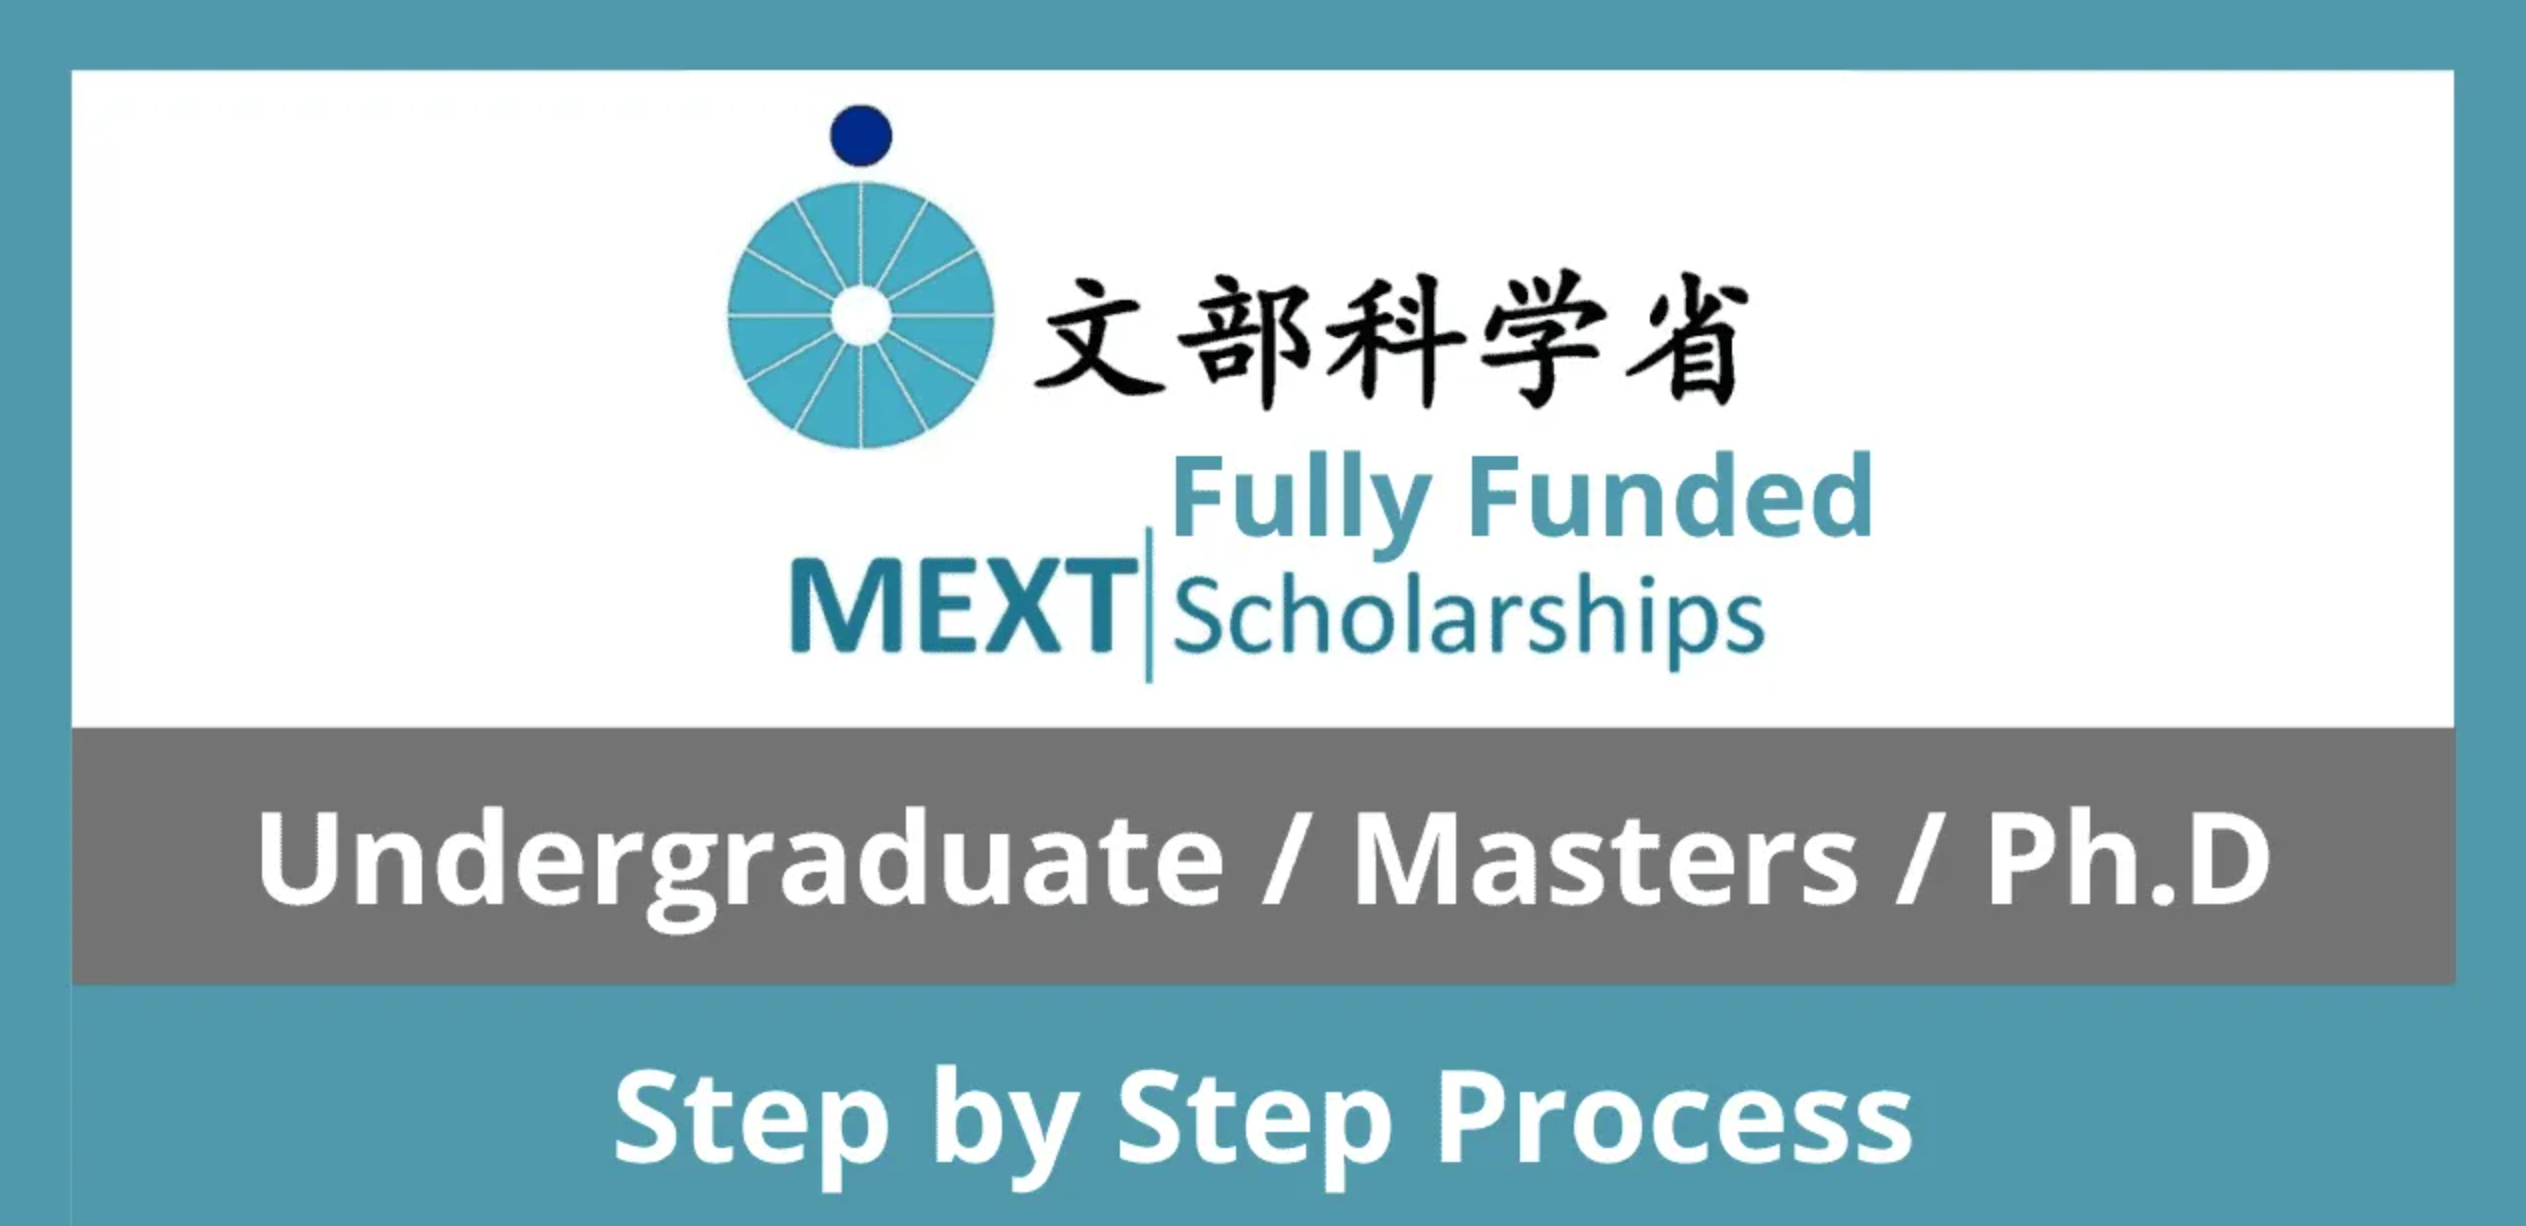 Fully Funded MEXT Scholarship in Japan for International Students